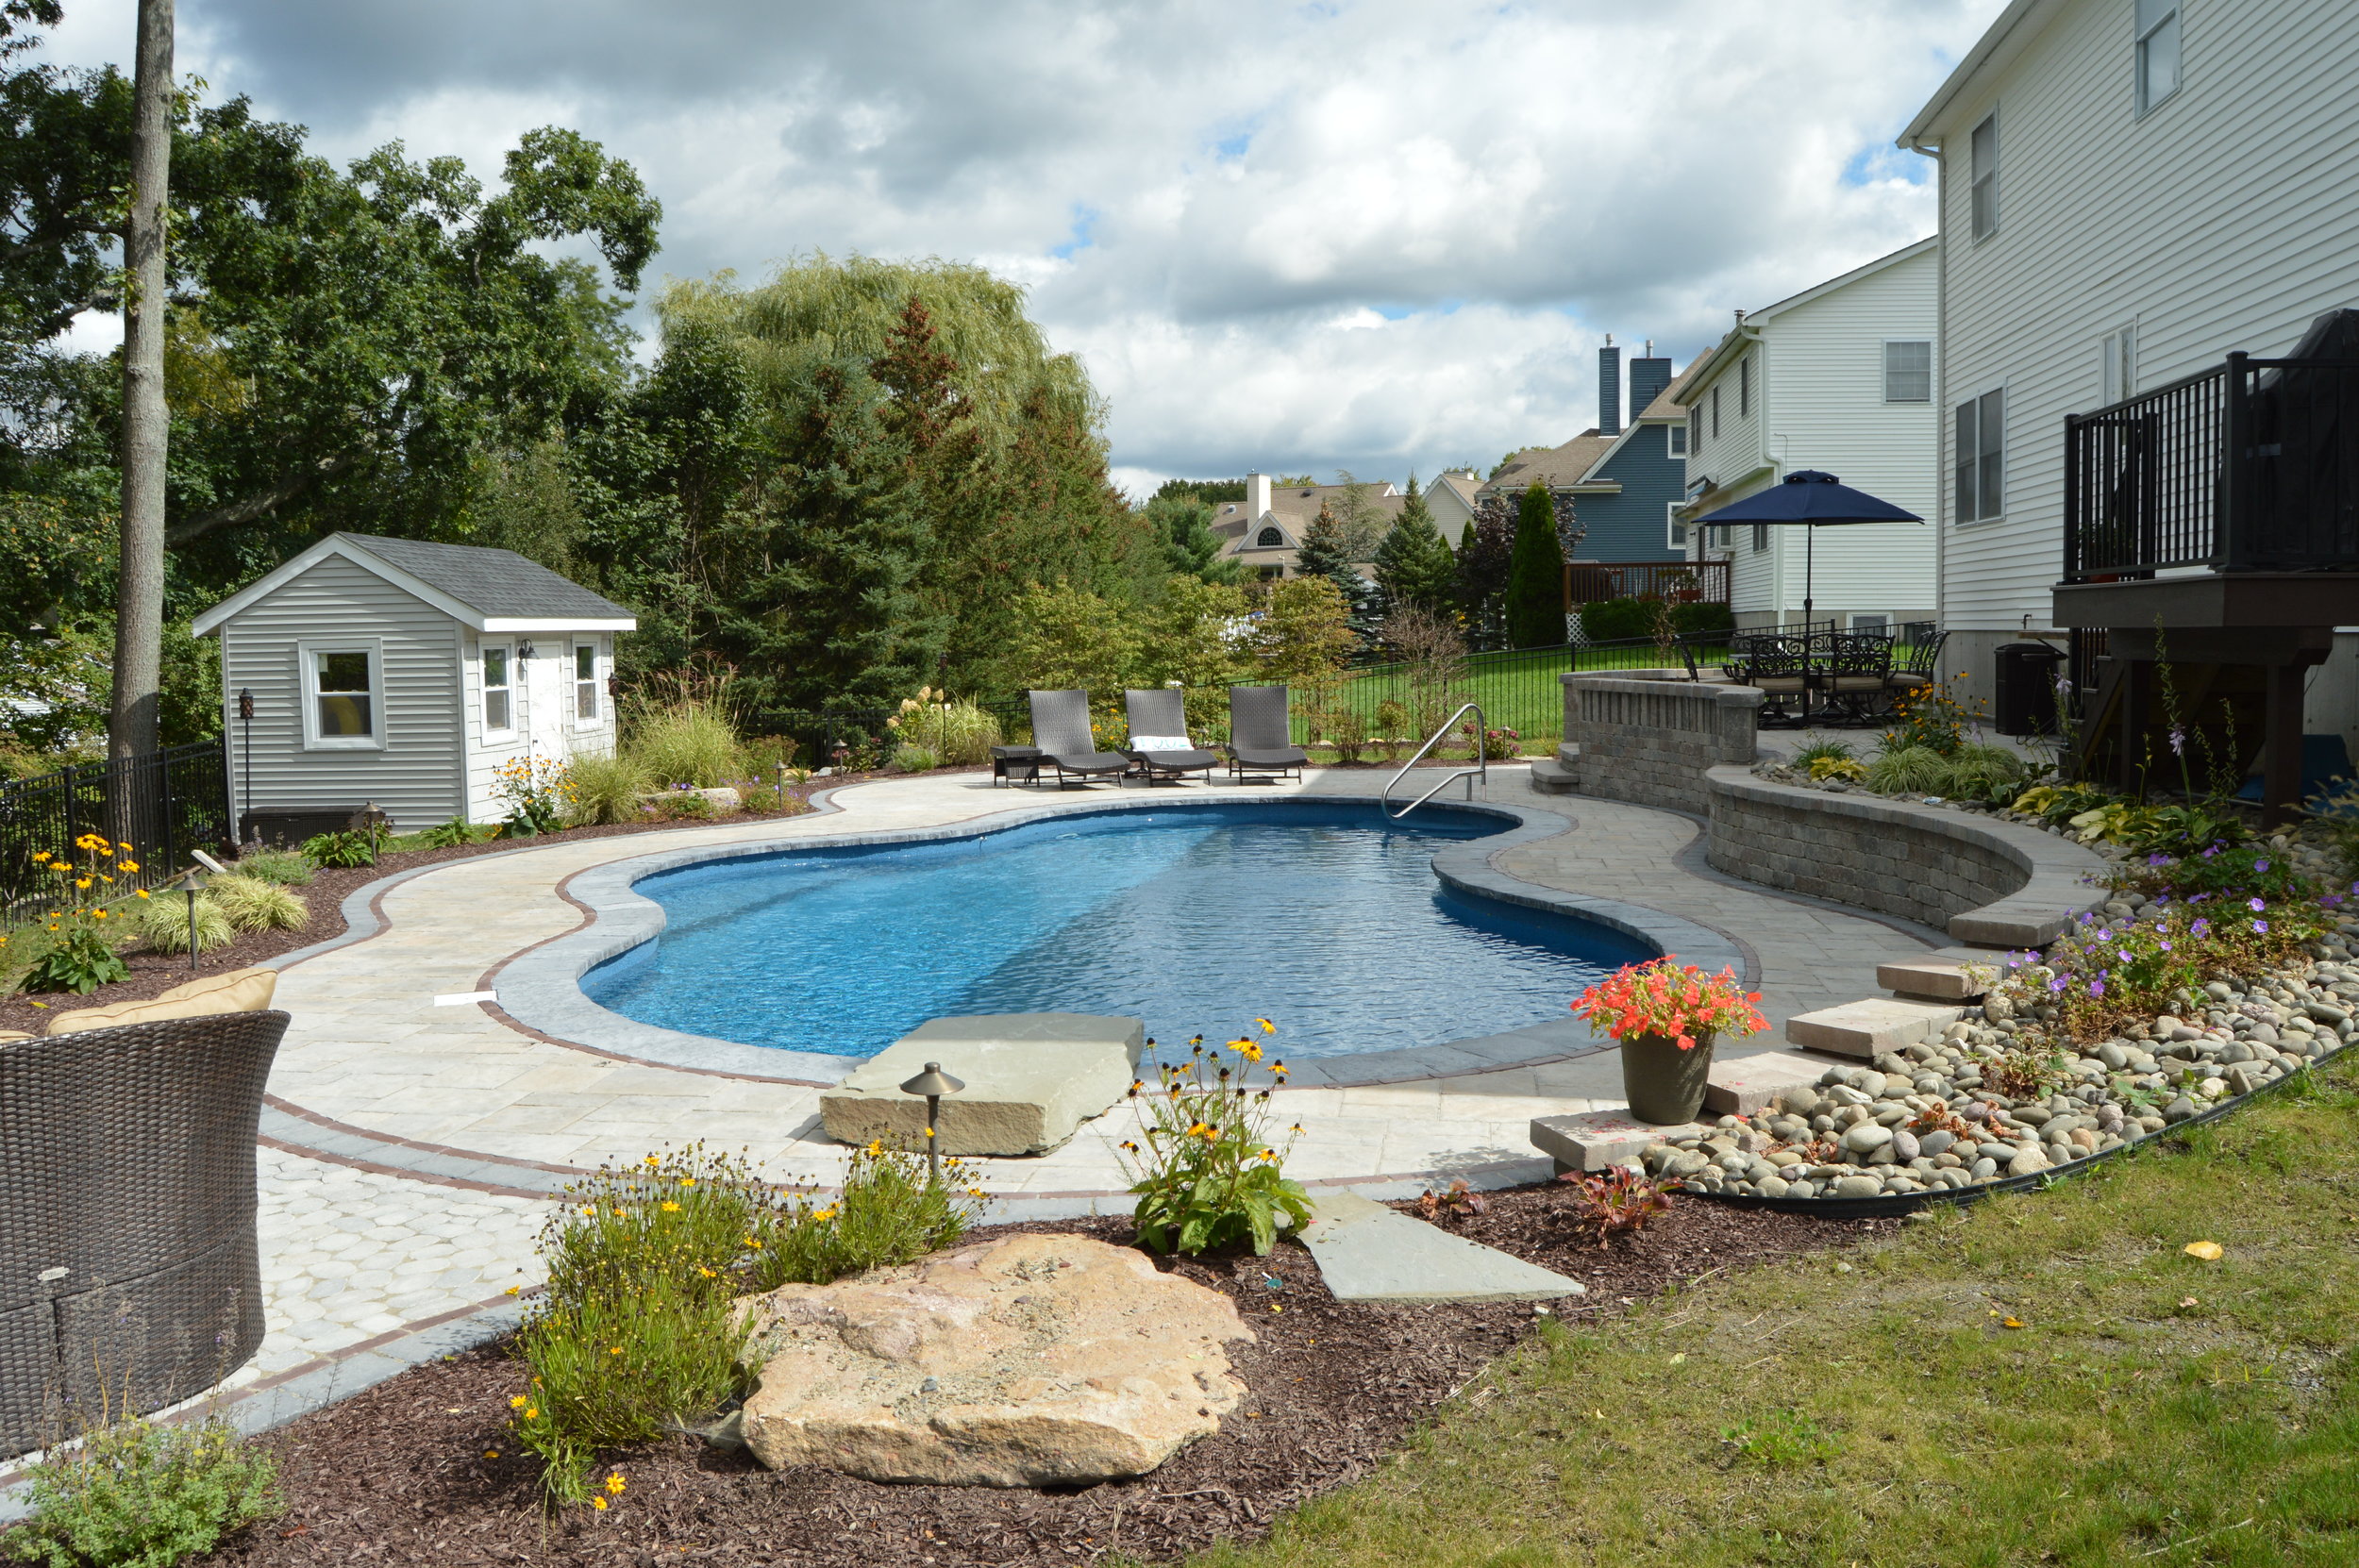 Can you explain the difference between hardscape and softscape in landscaping?